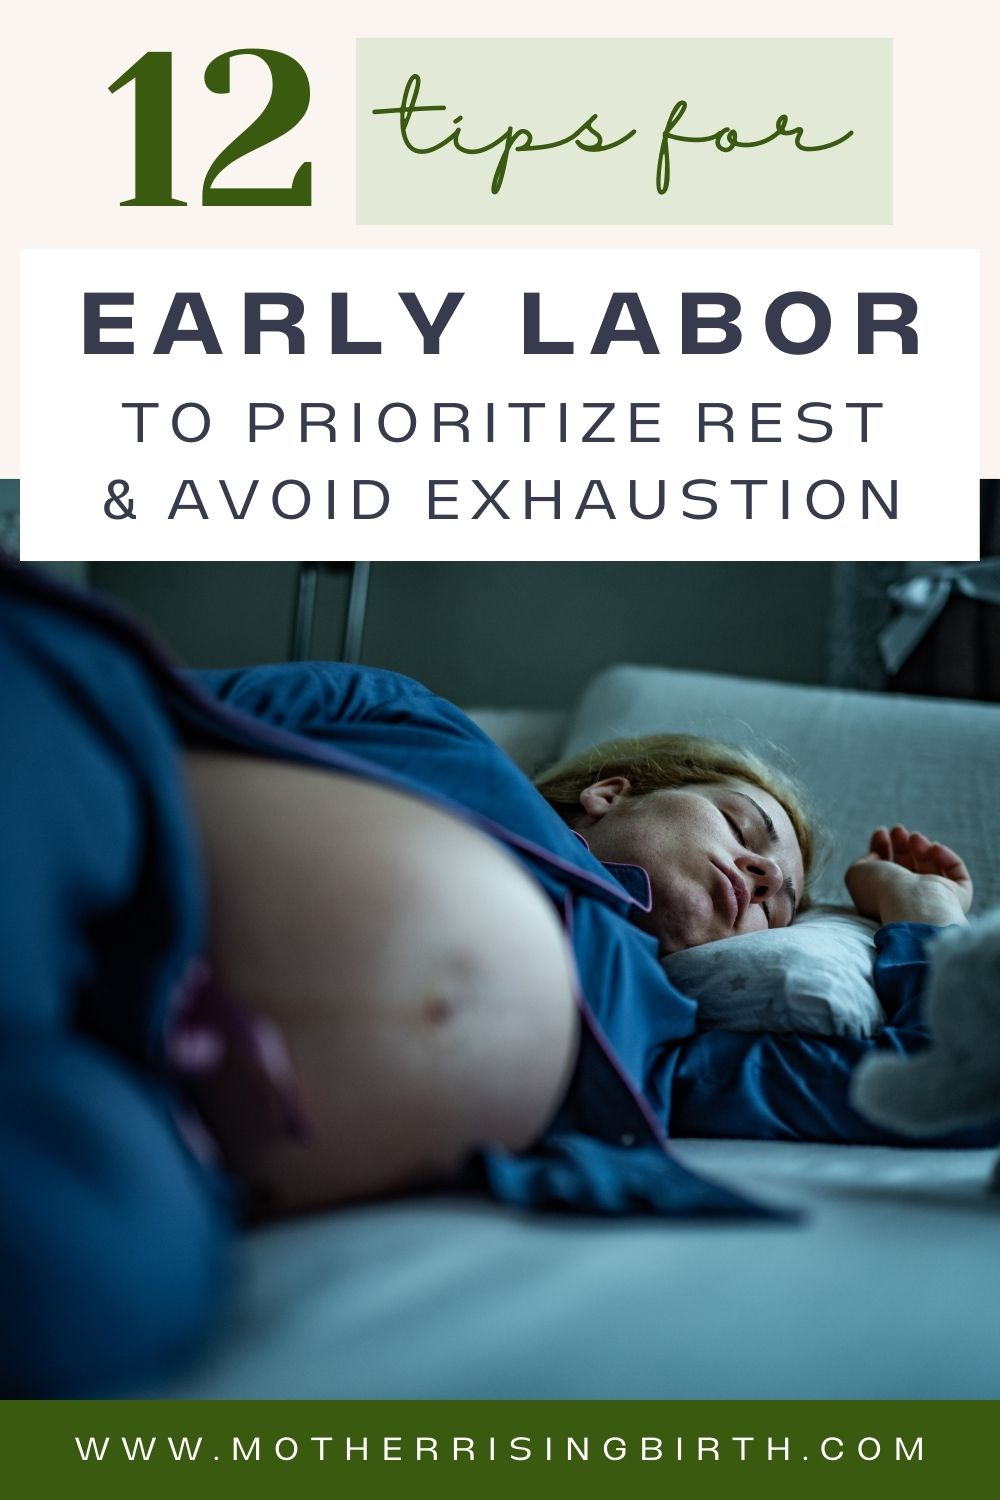 Pregnant woman with bare belly lying down on bed sleeping, one of the best tips for early labor to prioritize rest and avoid exhaustion.